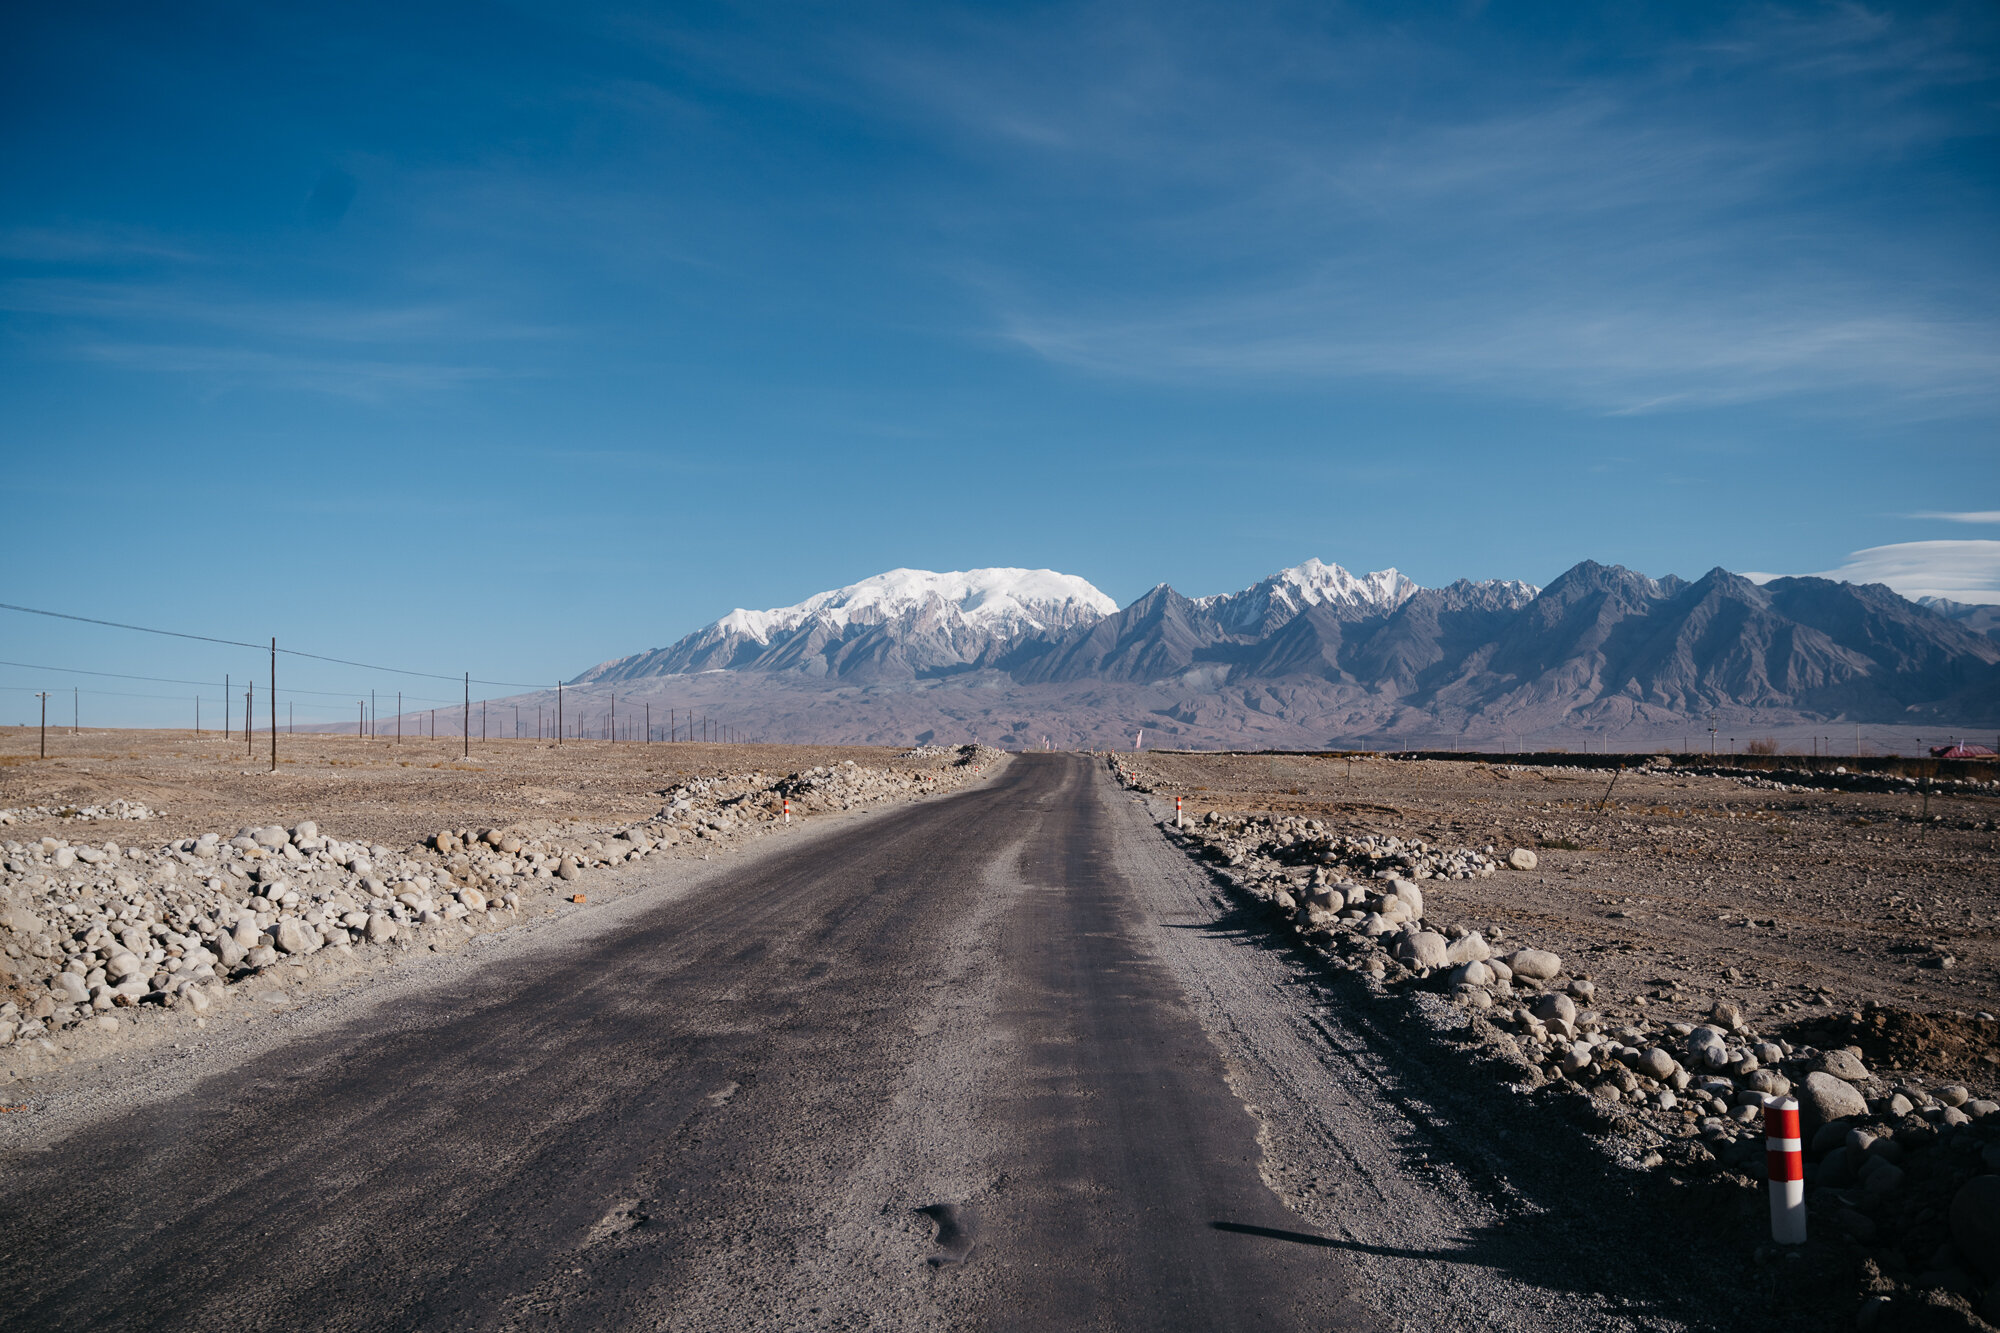  Leaving Tashkurgan, the first Chinese town after crossing the border from Pakistan, on route to Kashgar. 